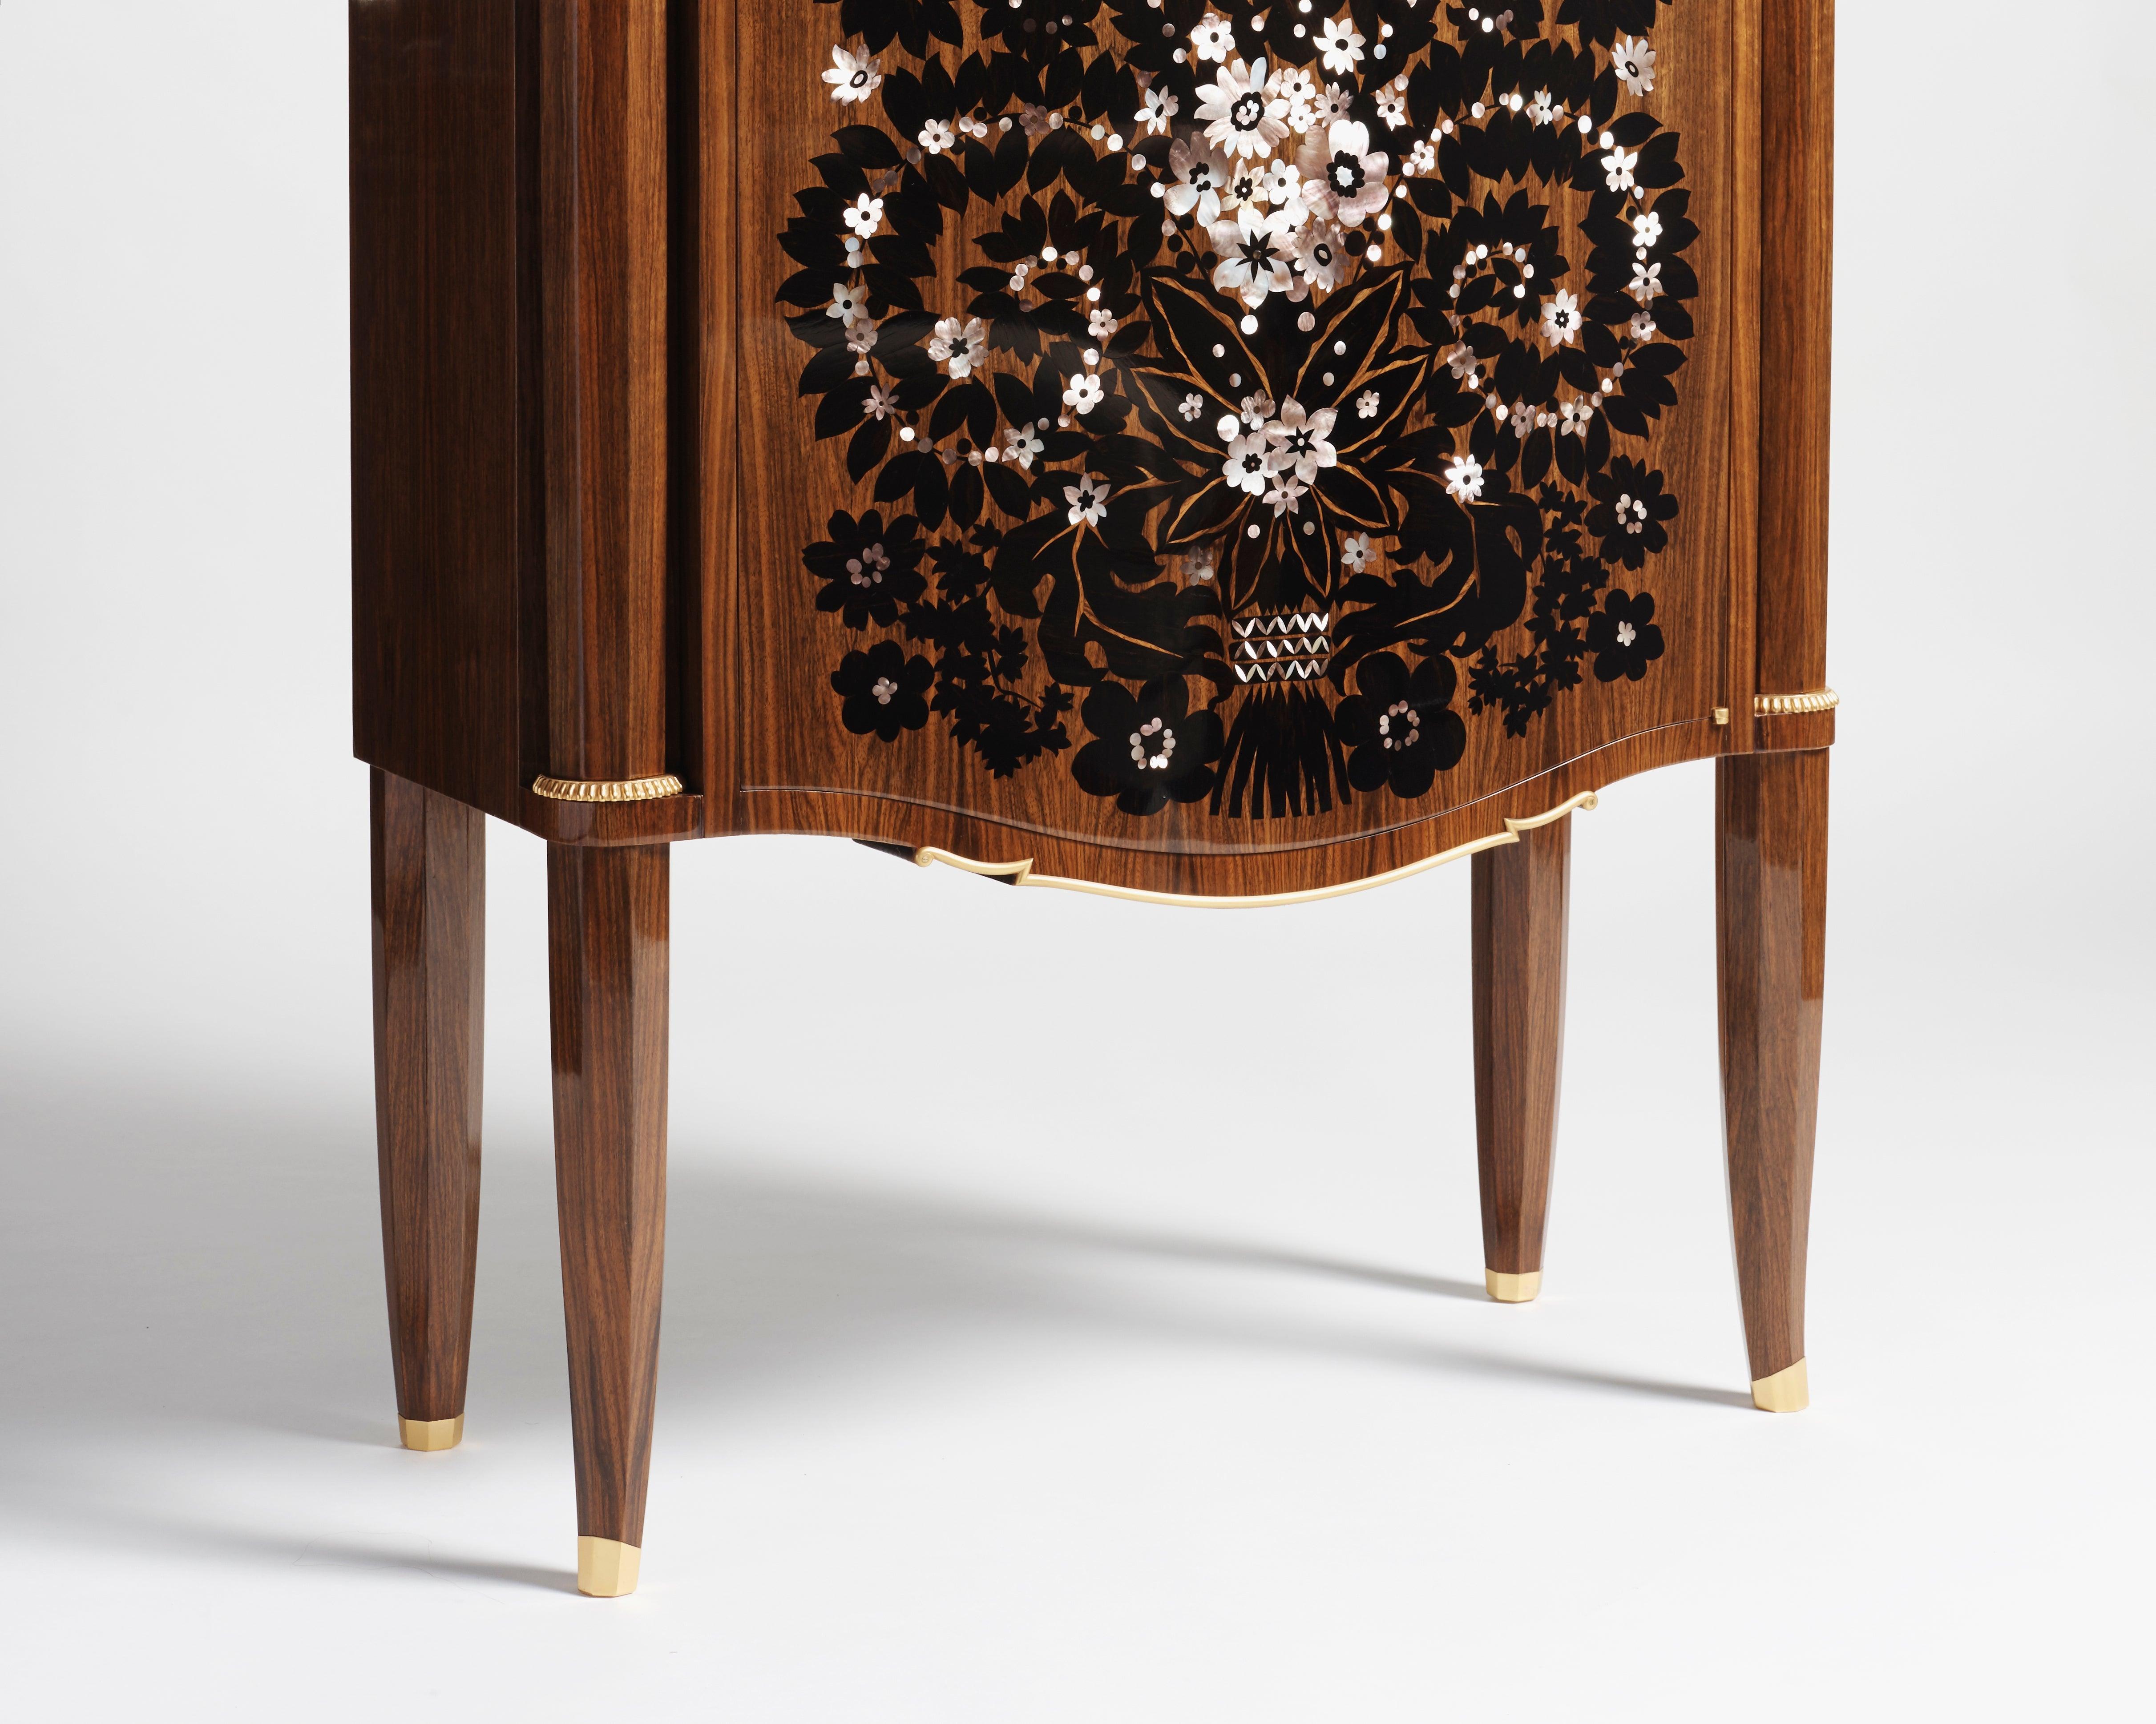 An exceptional, rare mahogany cabinet made by Jules Leleu the year after the war, featuring gilt bronze details and ornaments, and an elaborate, mother of pearl and ebony inlay by Messager.